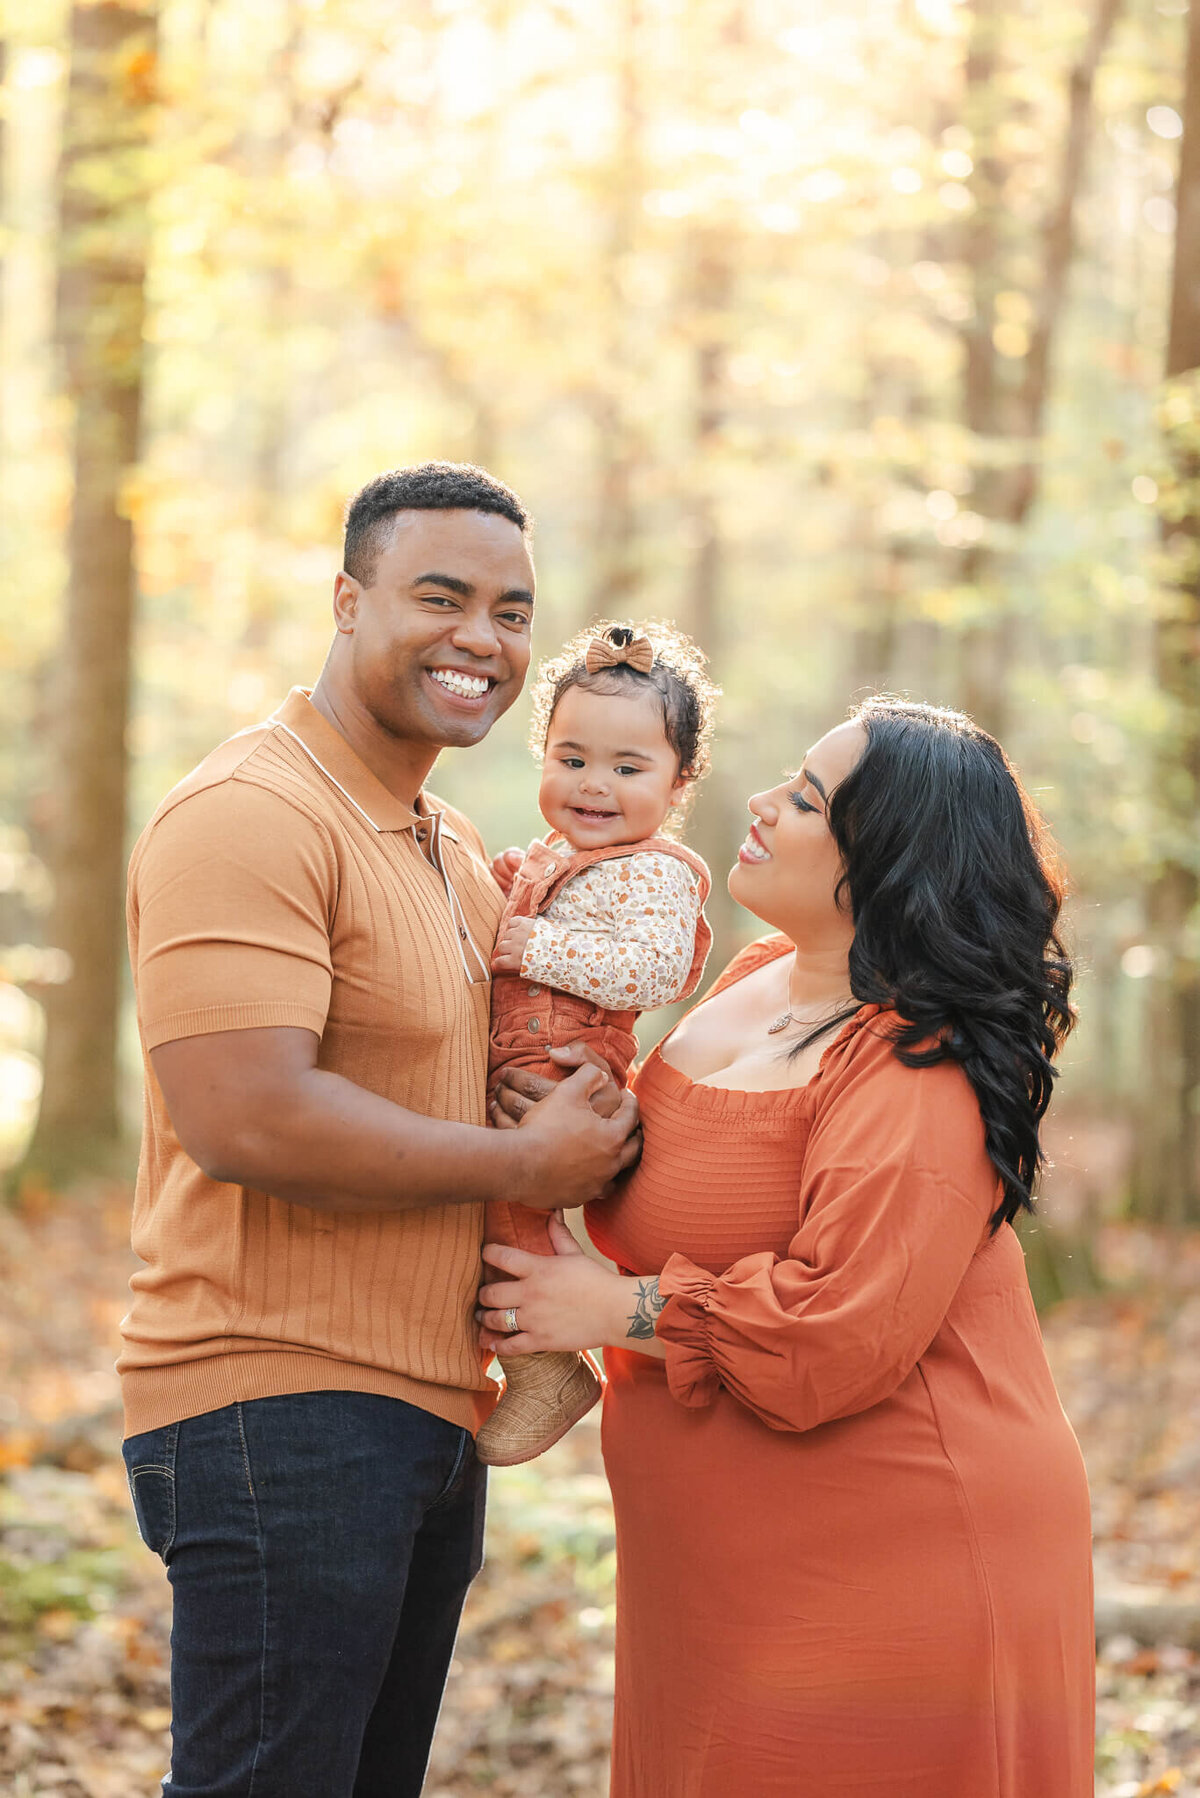 A family of three poses for fall family photos. The dad is in jeans and an orange shirt. The toddler girl wears orange overalls and matching bow. The mom wears an orange dress with long sleeves.